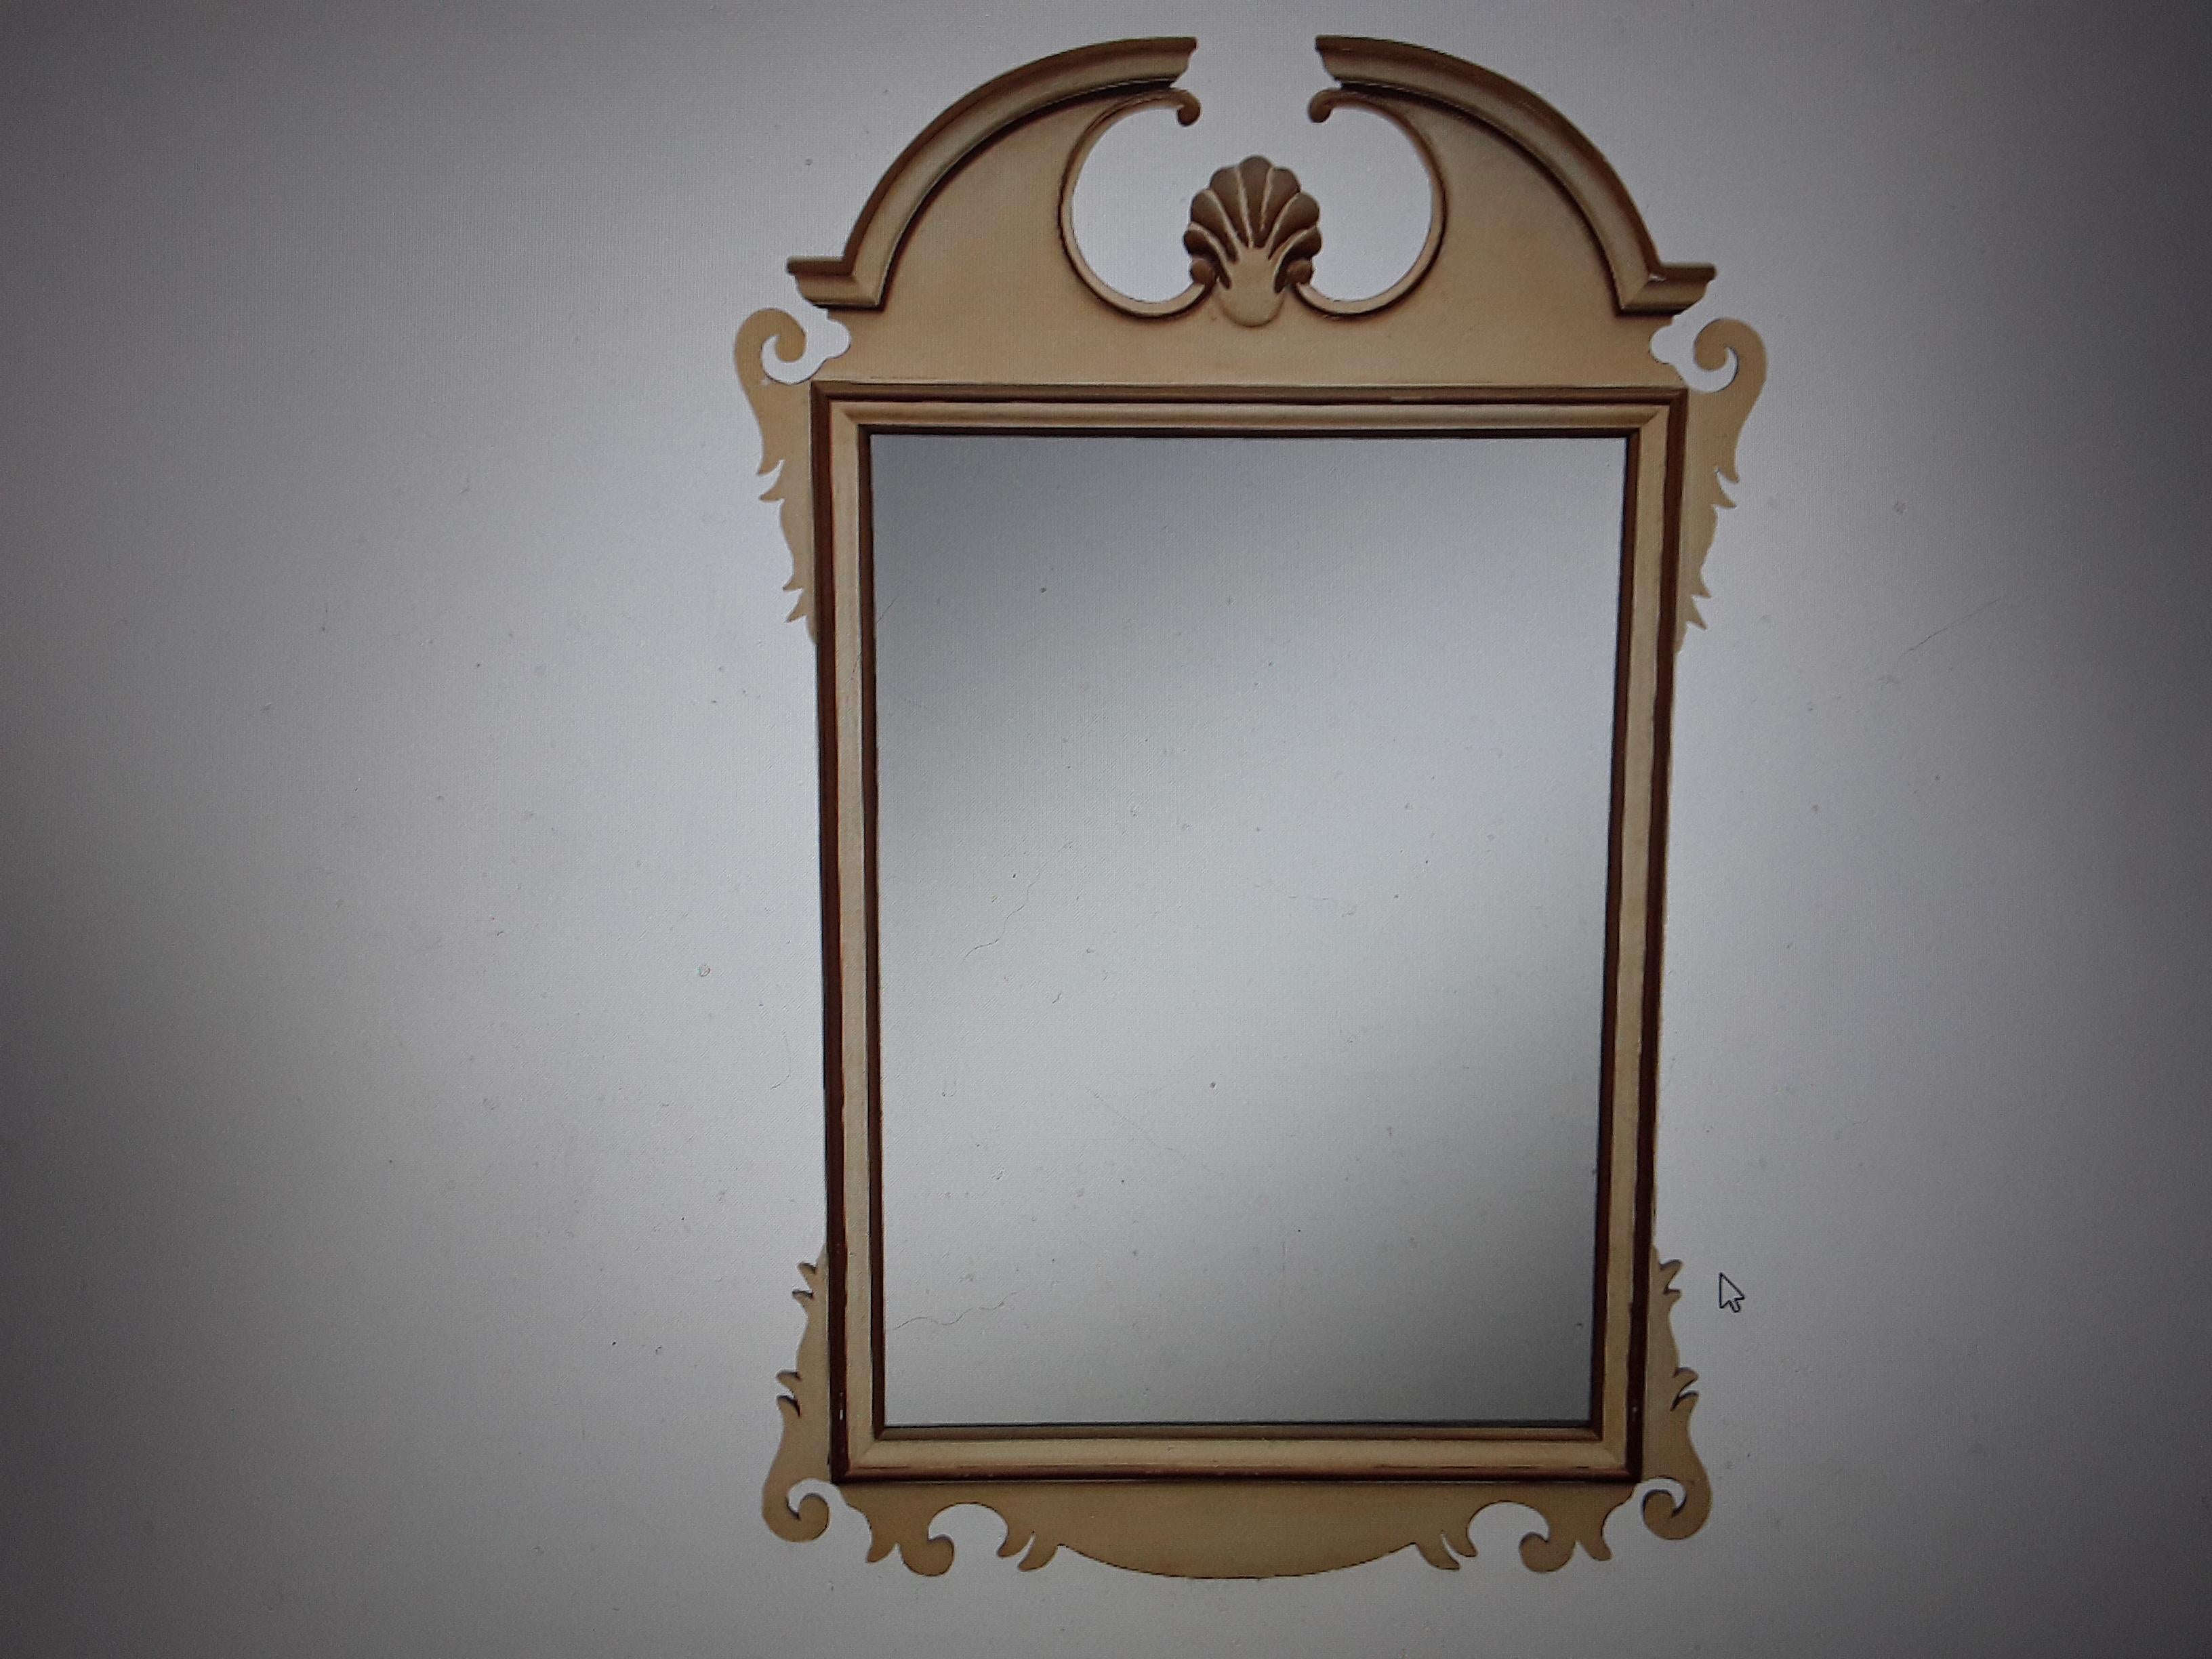 1940's Early American style Carved and Patinated Wood Wall Mirror For Sale 3